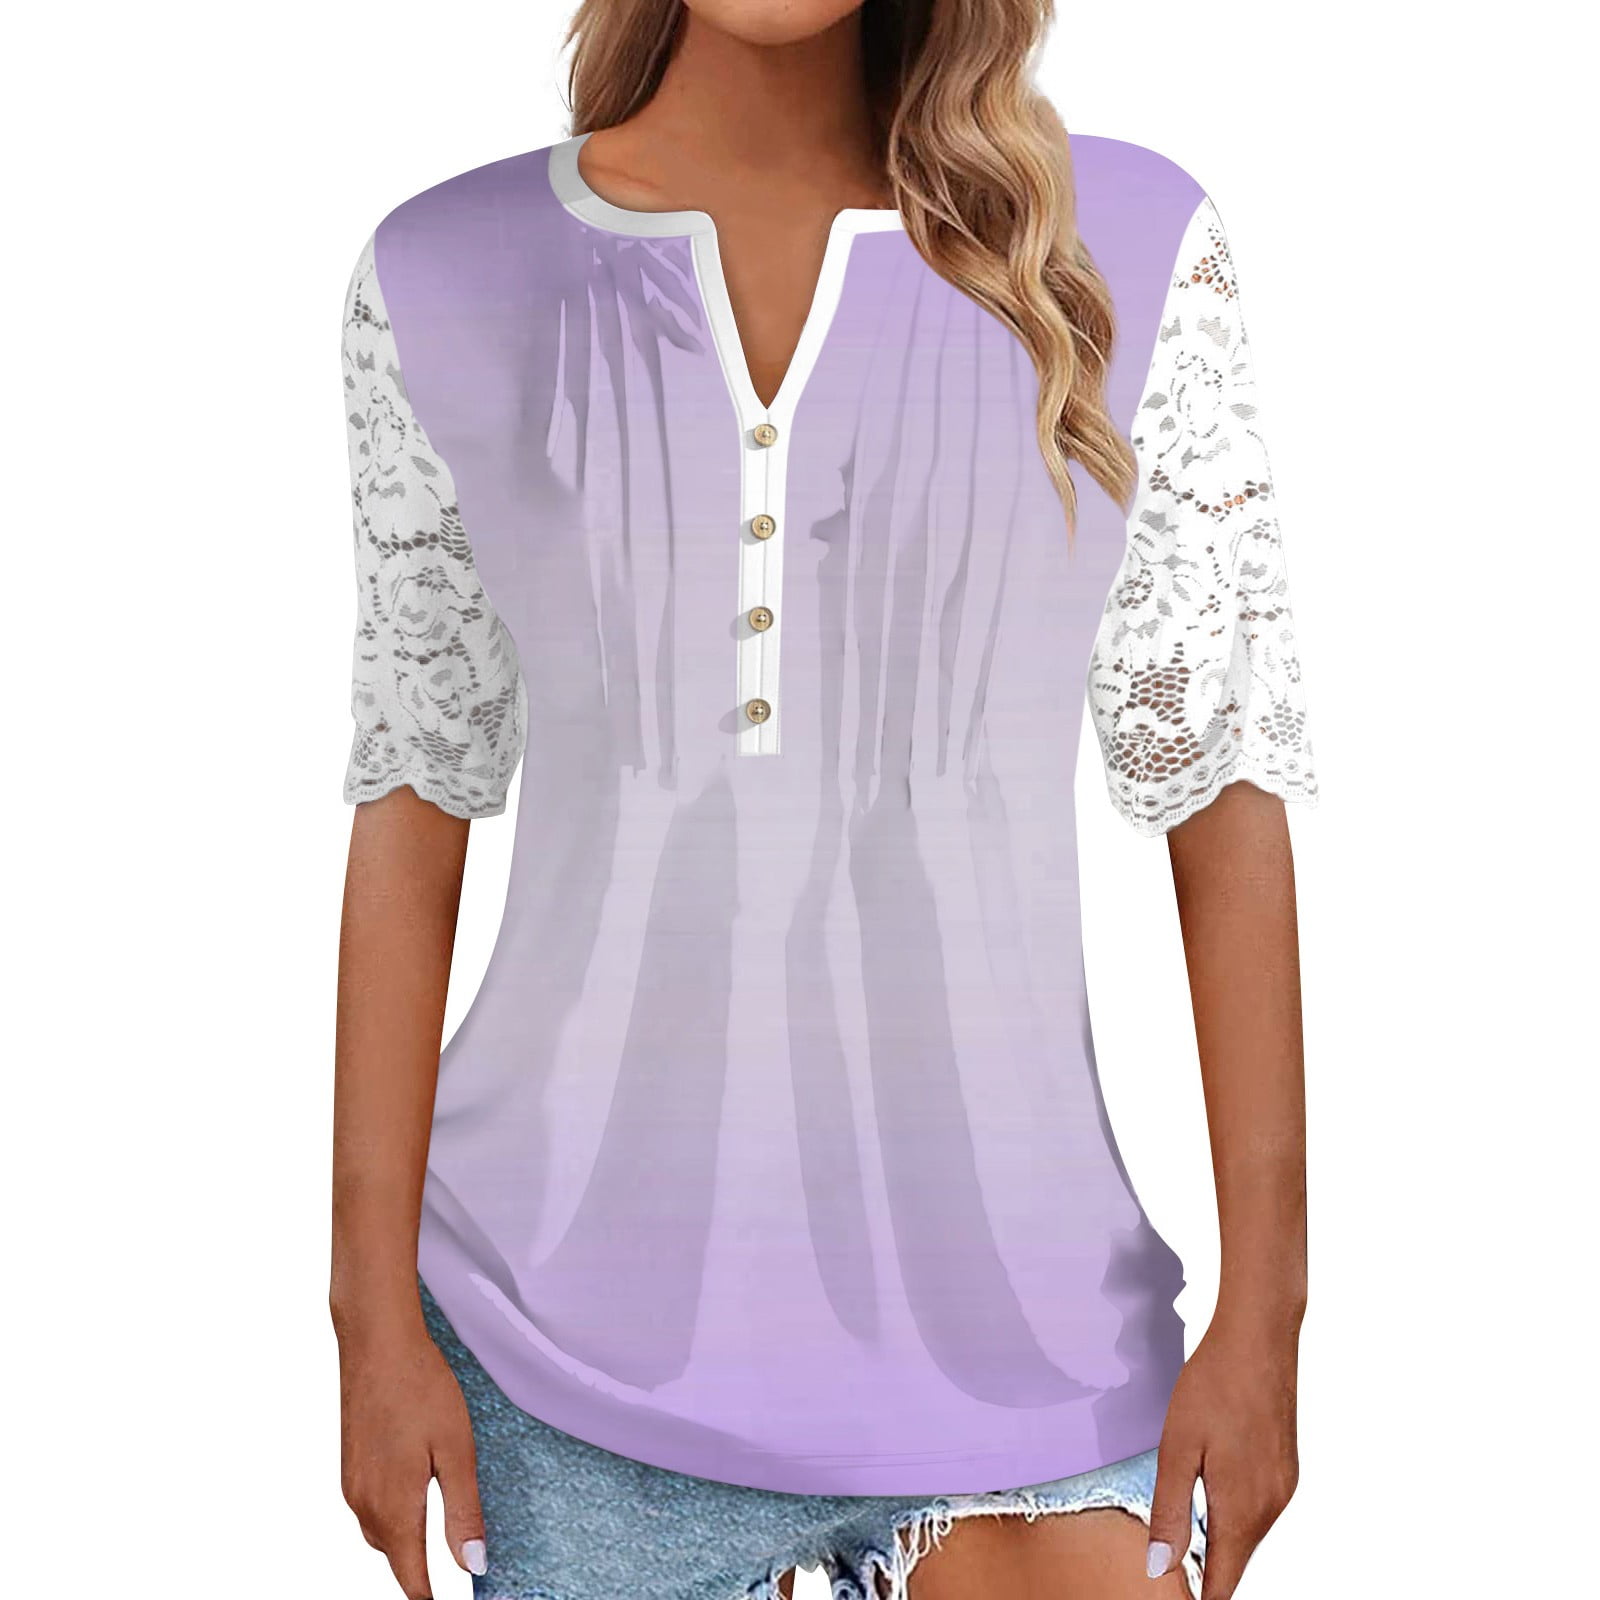 Sksloeg Womens Blouses and Tops Dressy Gradient Printed Lace Short Sleeve  Tunic Shirt Casual Loose V-Neck Plain Button Down Blouses,Light Purple XXL  